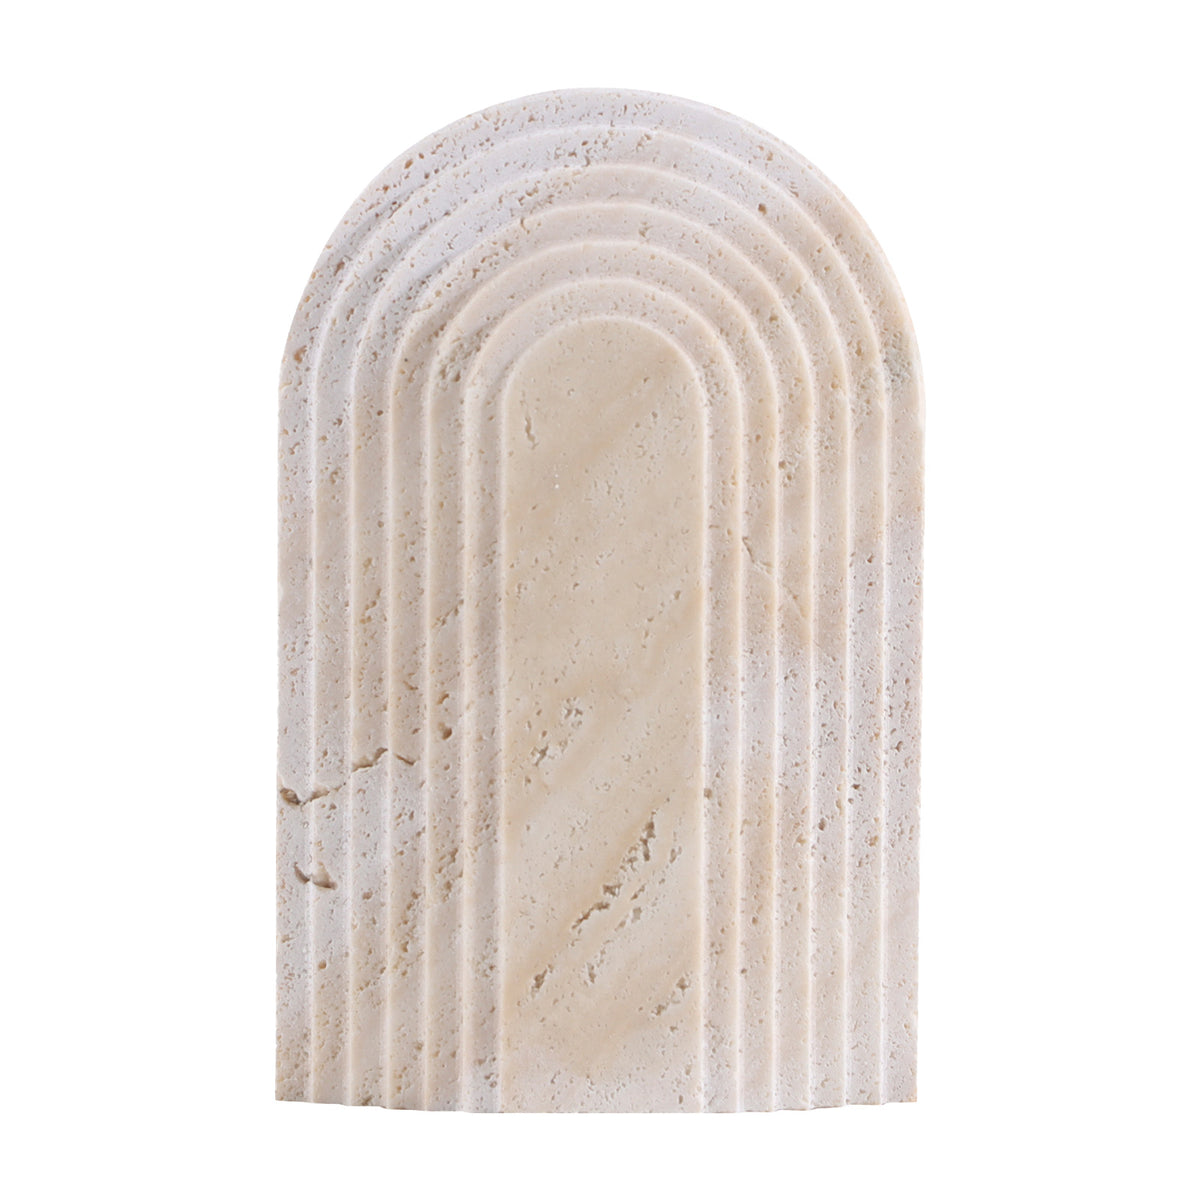 Arch Marble I Sculpture